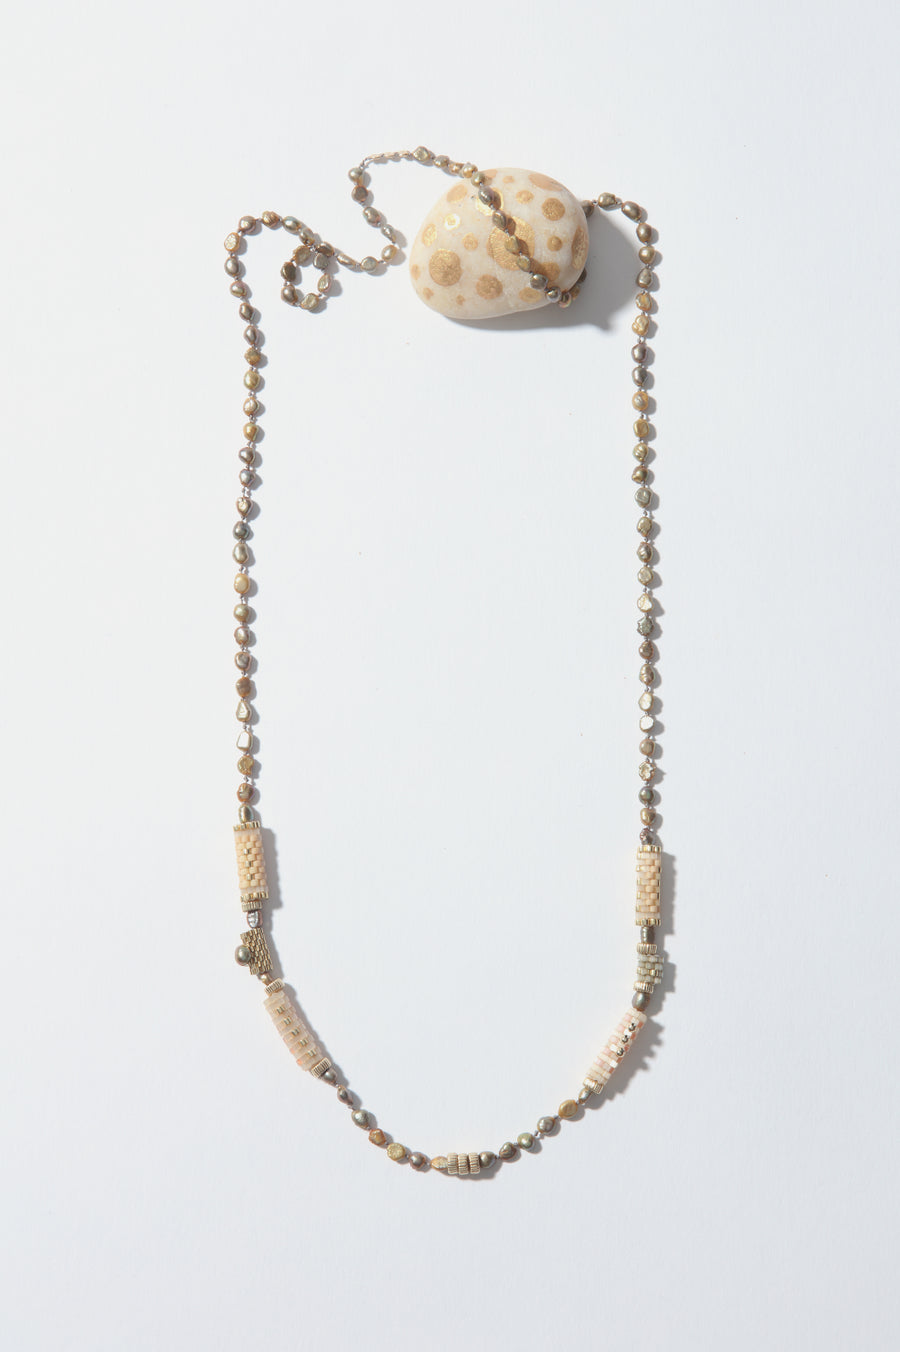 Dove Knotted Pearls and Woven Bead Necklace